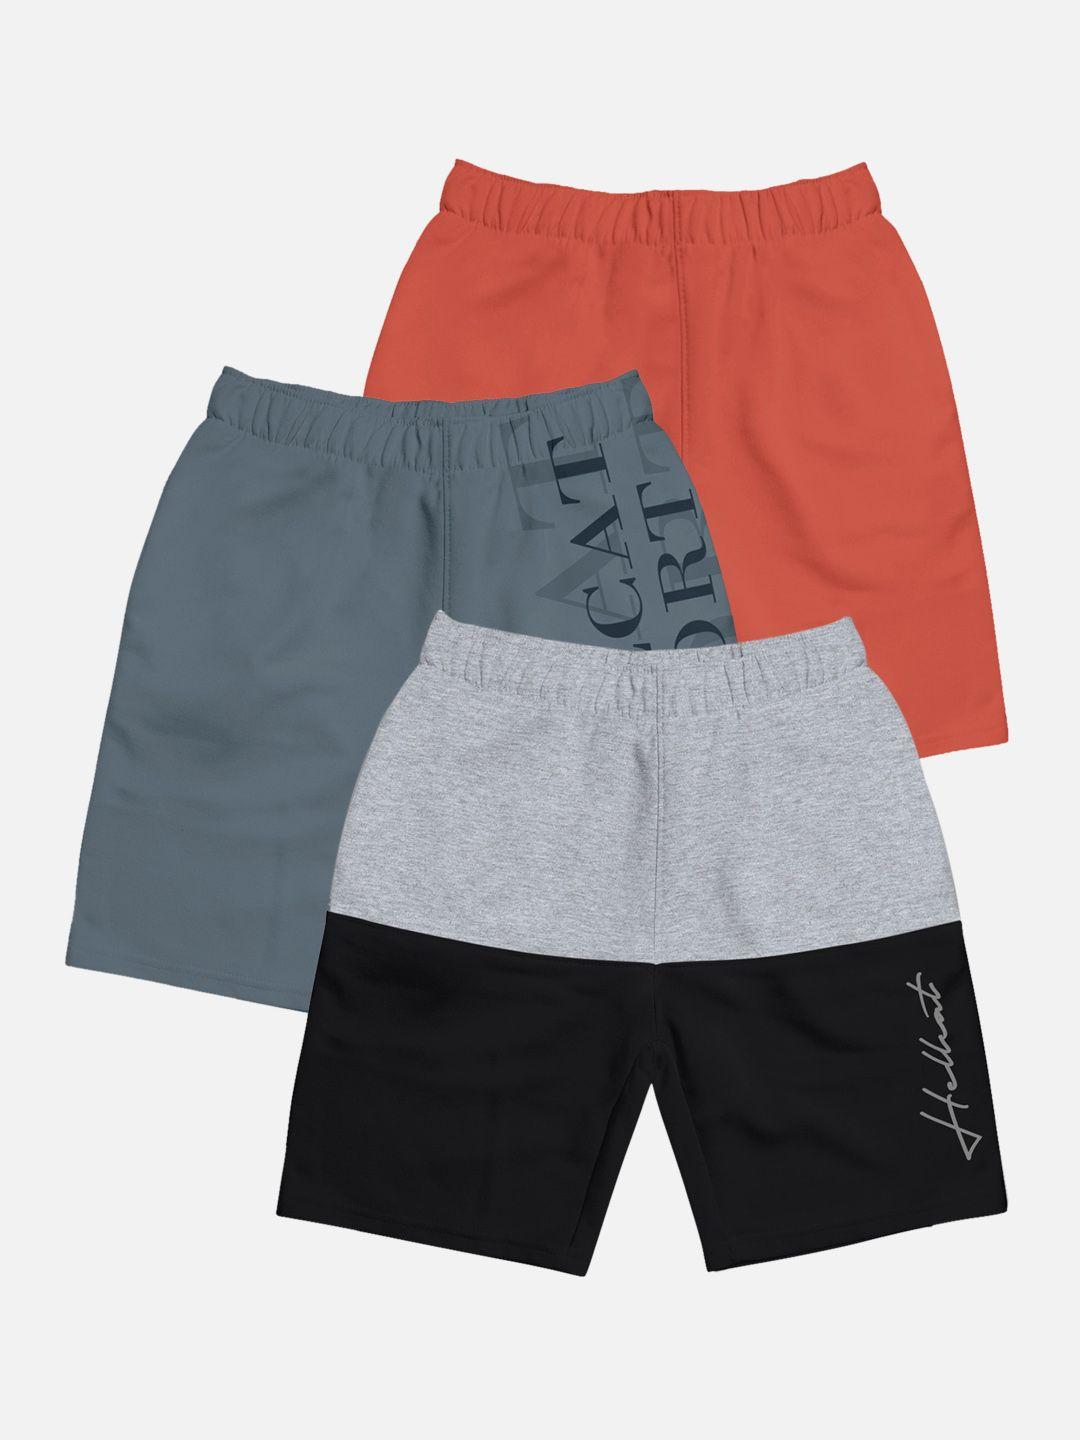 hellcat-boys-pack-of-3-mid-rise-typography-printed-cotton-shorts